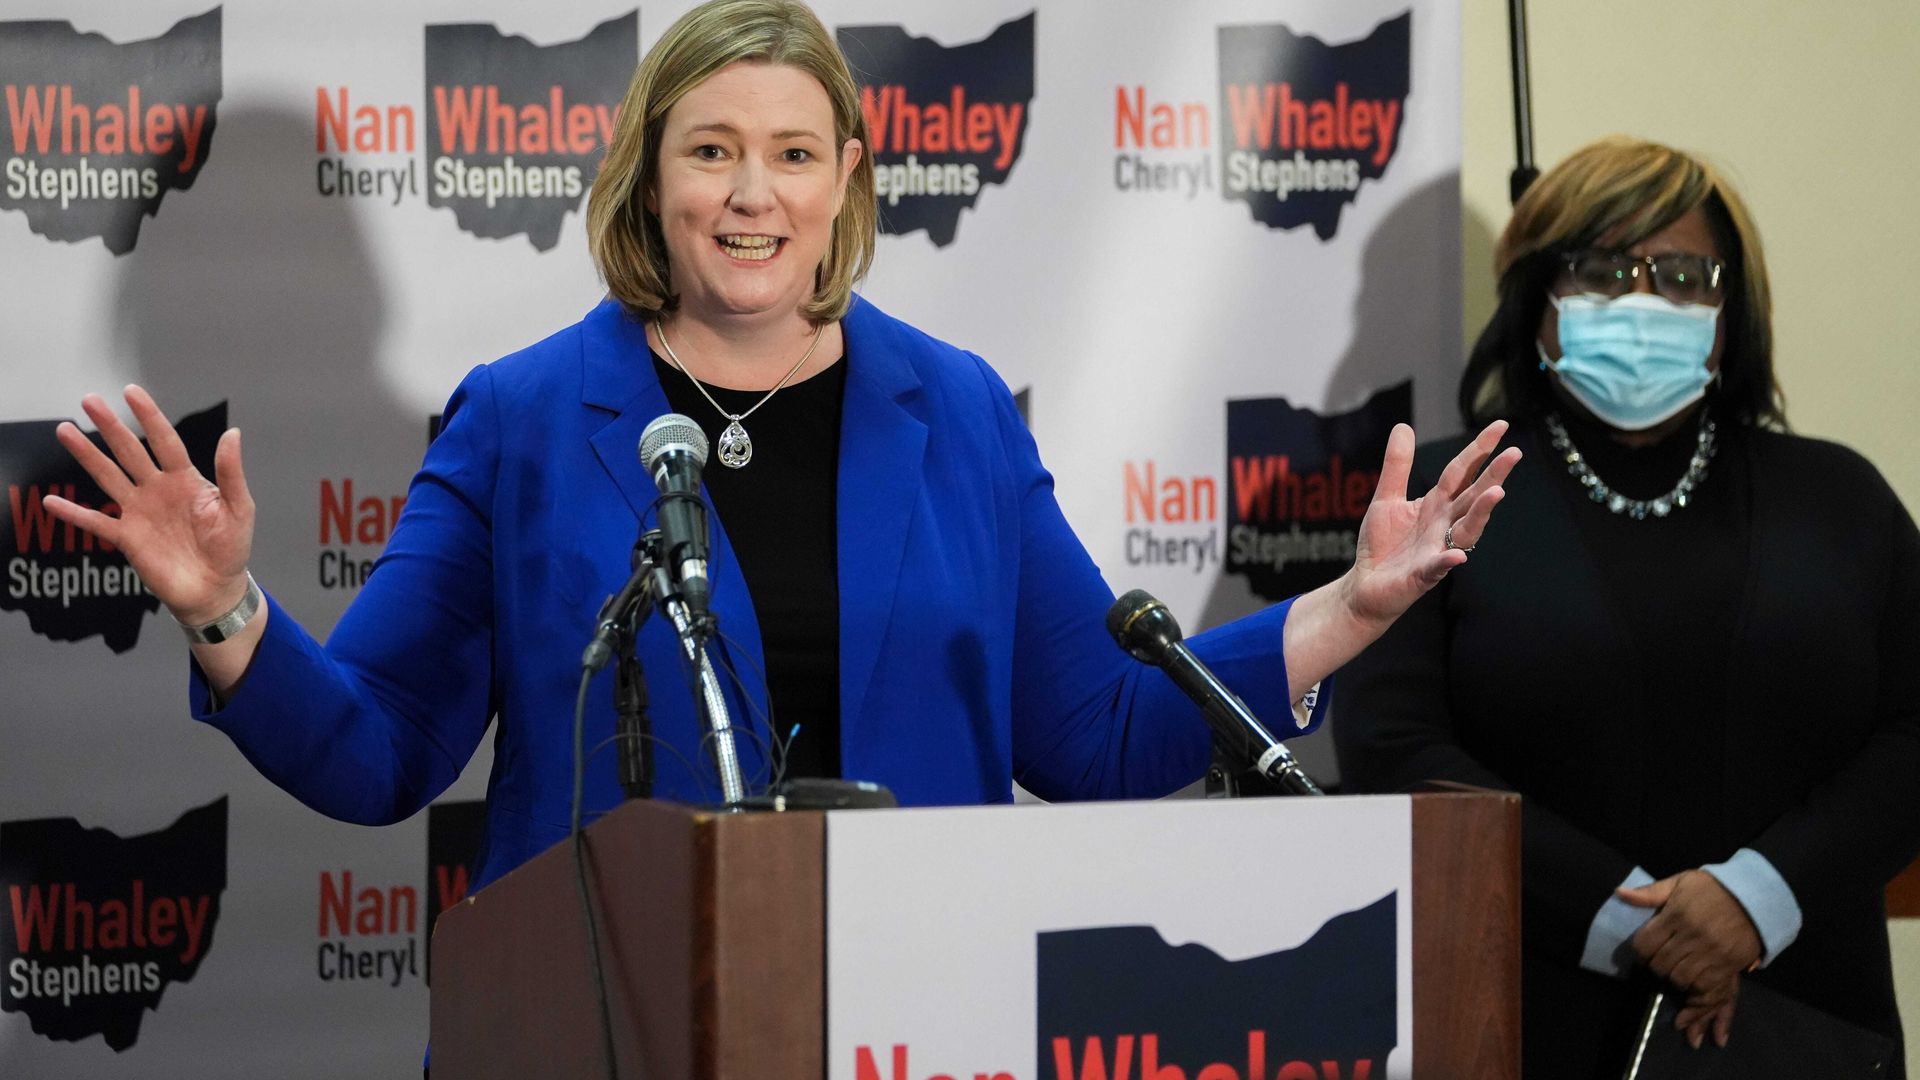 Nan Whaley and Cheryl Stephens, Democratic candidates for governor and lieutenant governor of Ohio, on the campaign trail.